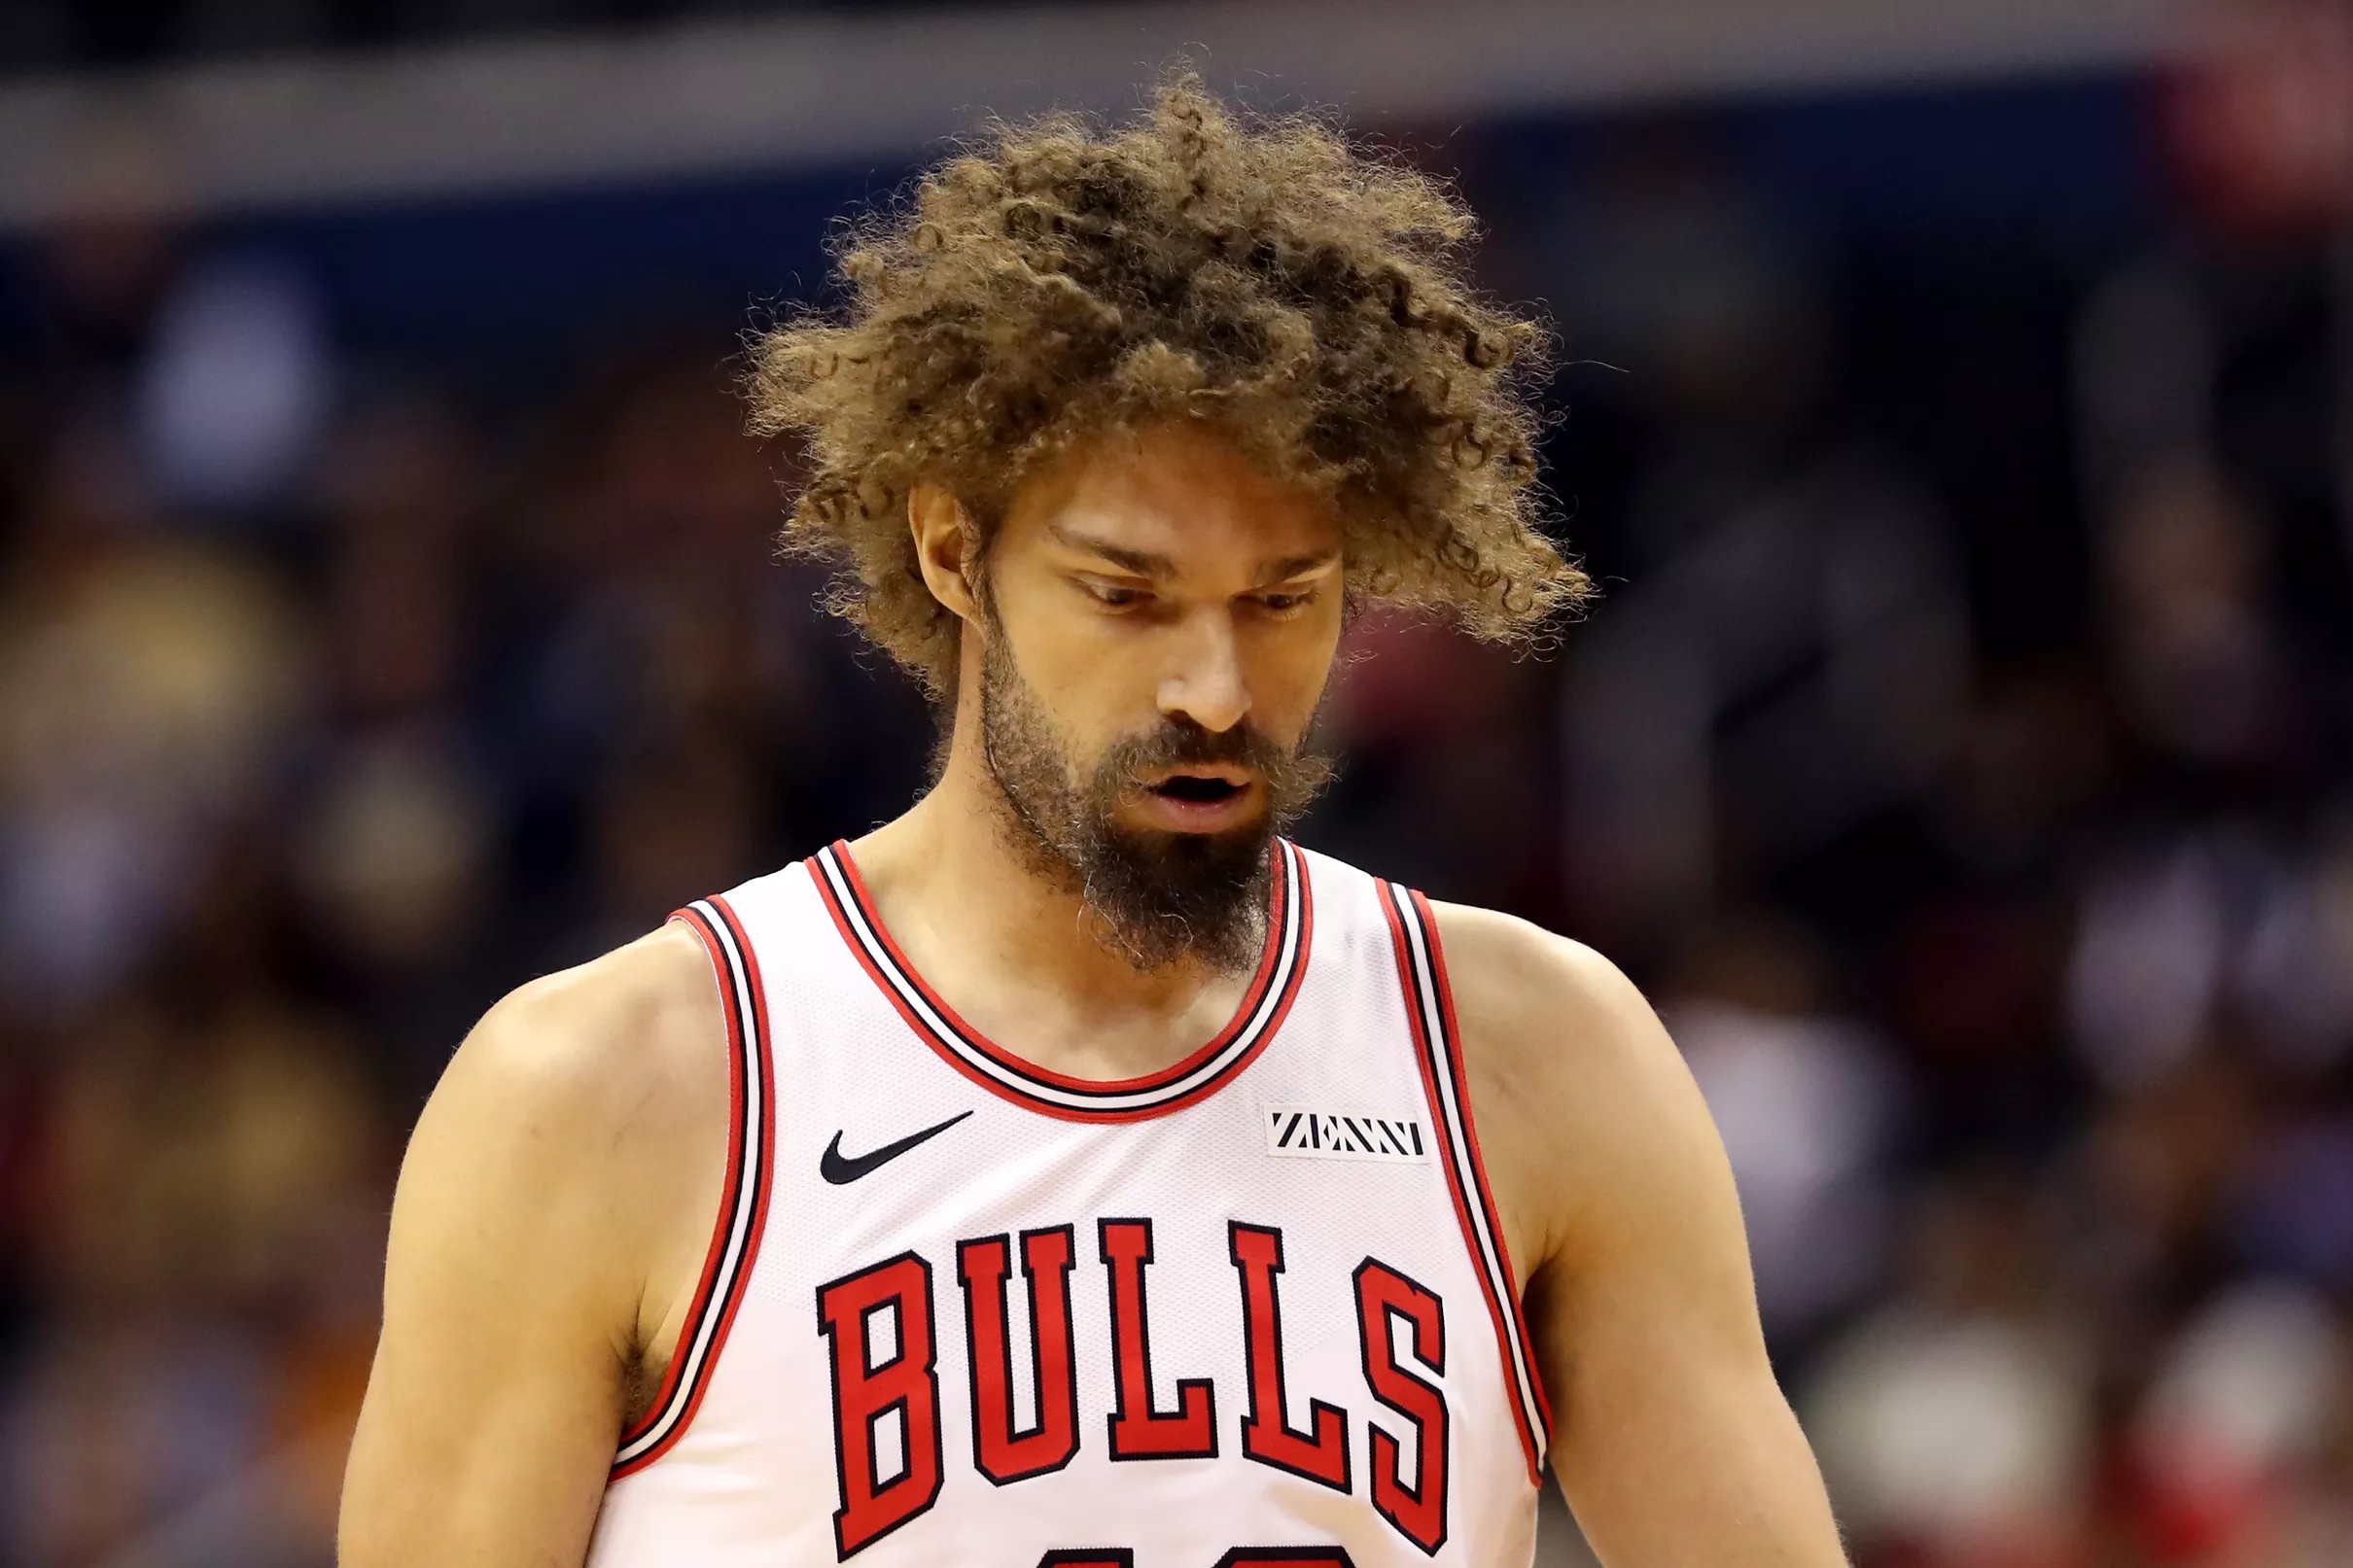 What Ethnicity is Robin Lopez?